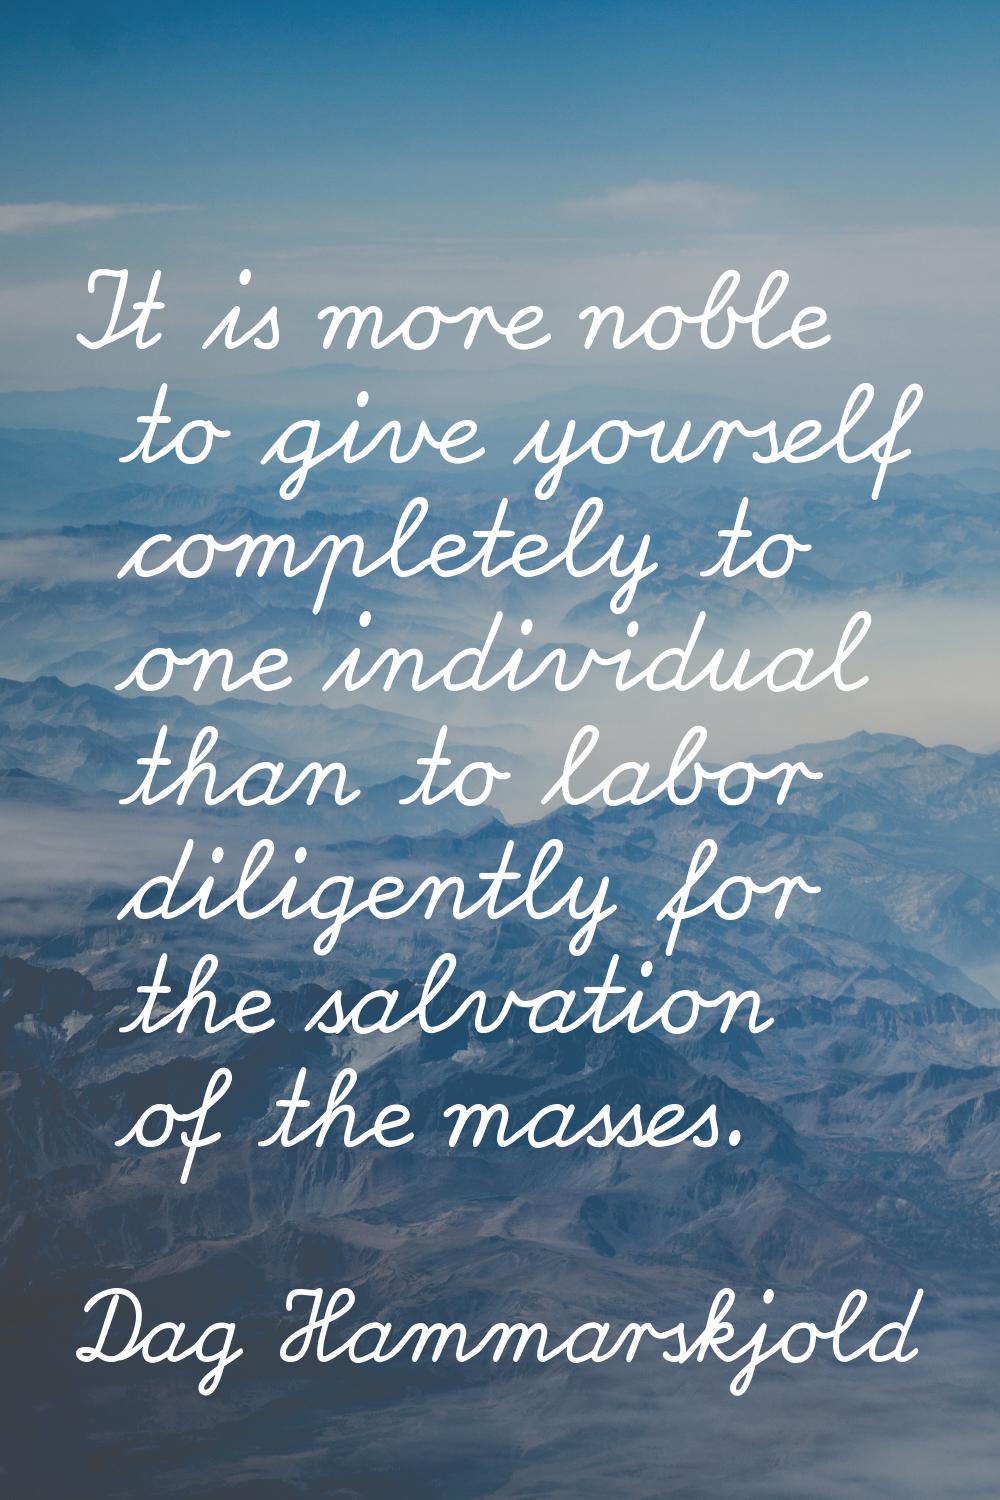 It is more noble to give yourself completely to one individual than to labor diligently for the sal